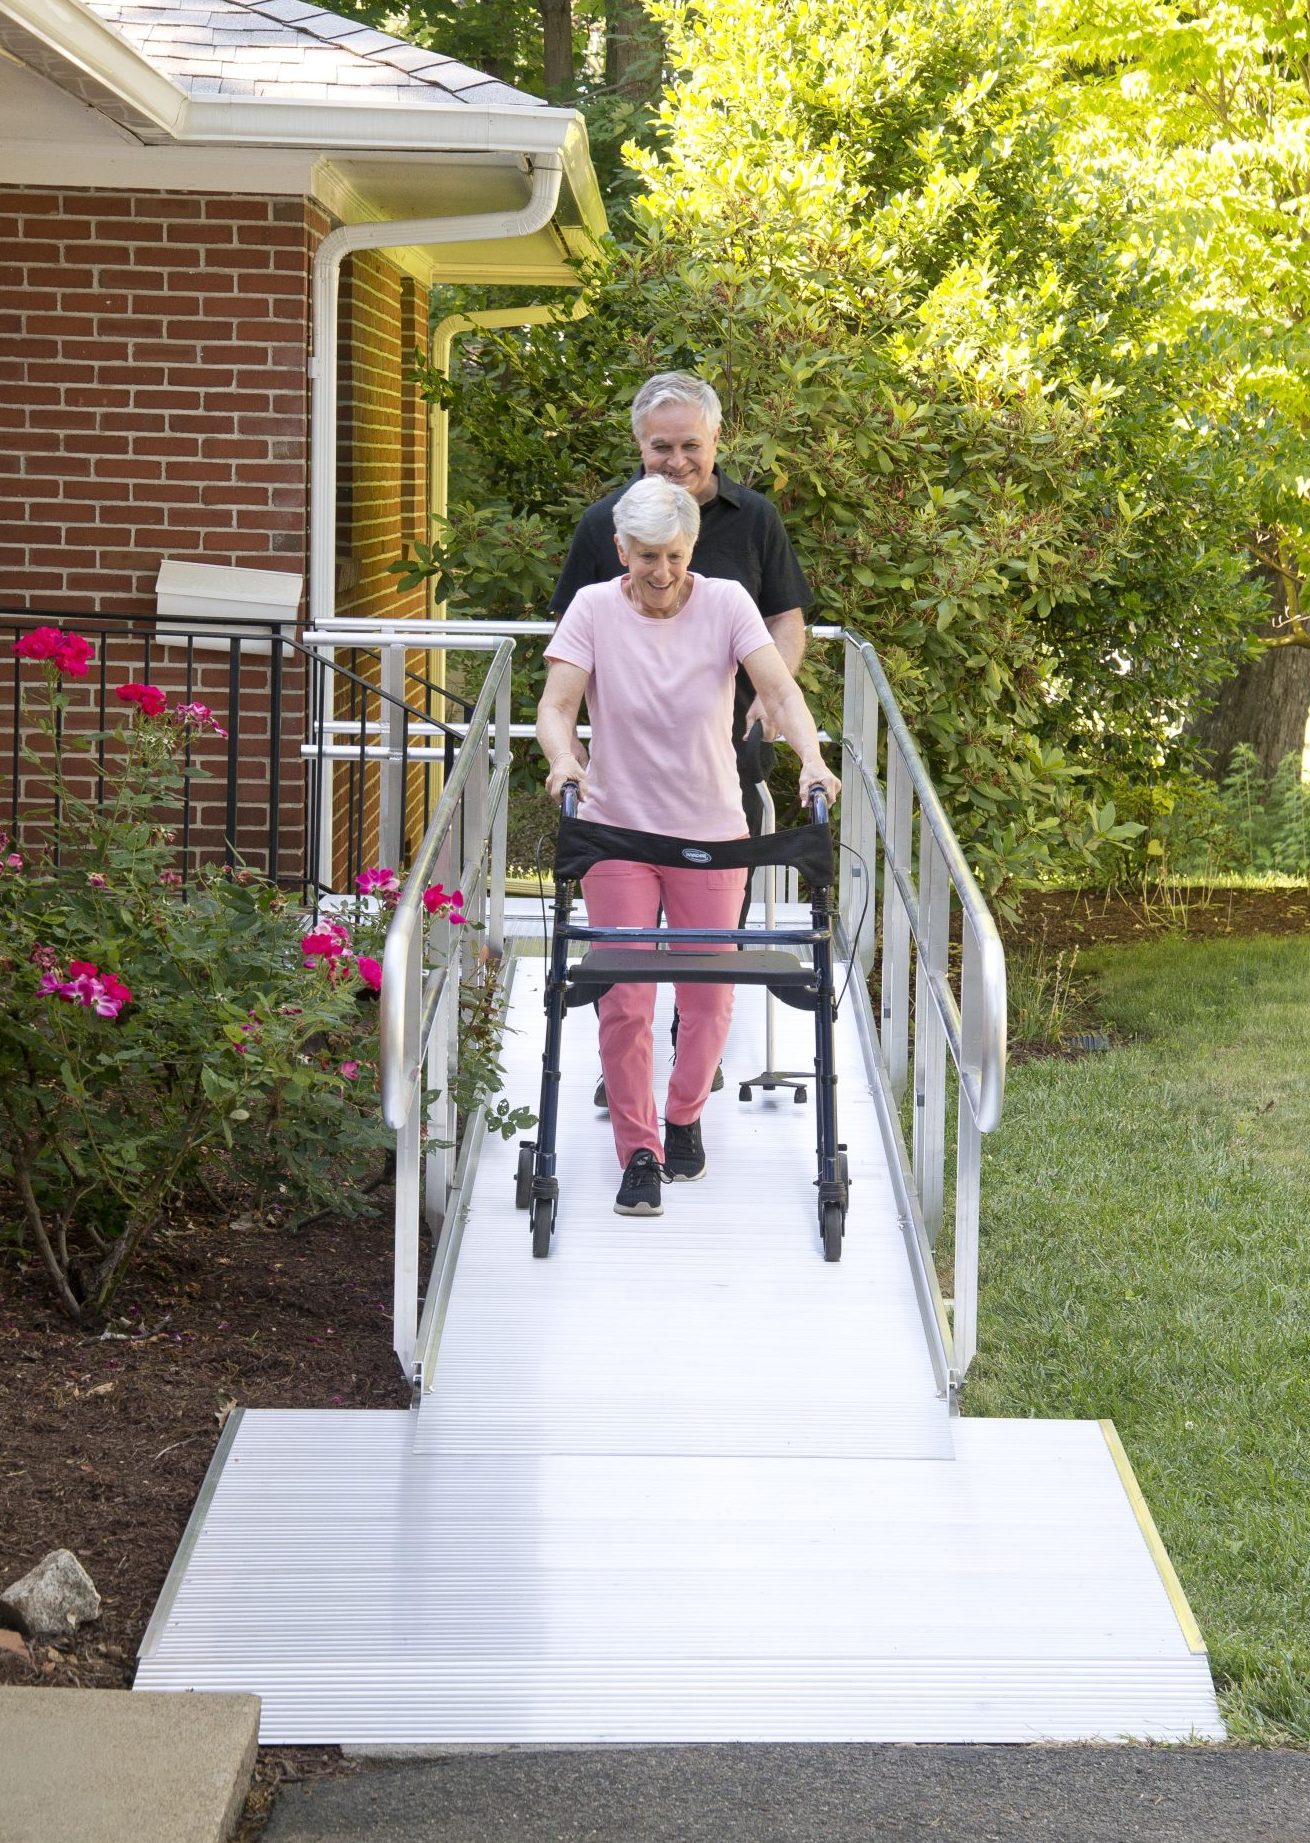 Elderly woman walking down a ramp with a walking aid and assistance from a gentleman